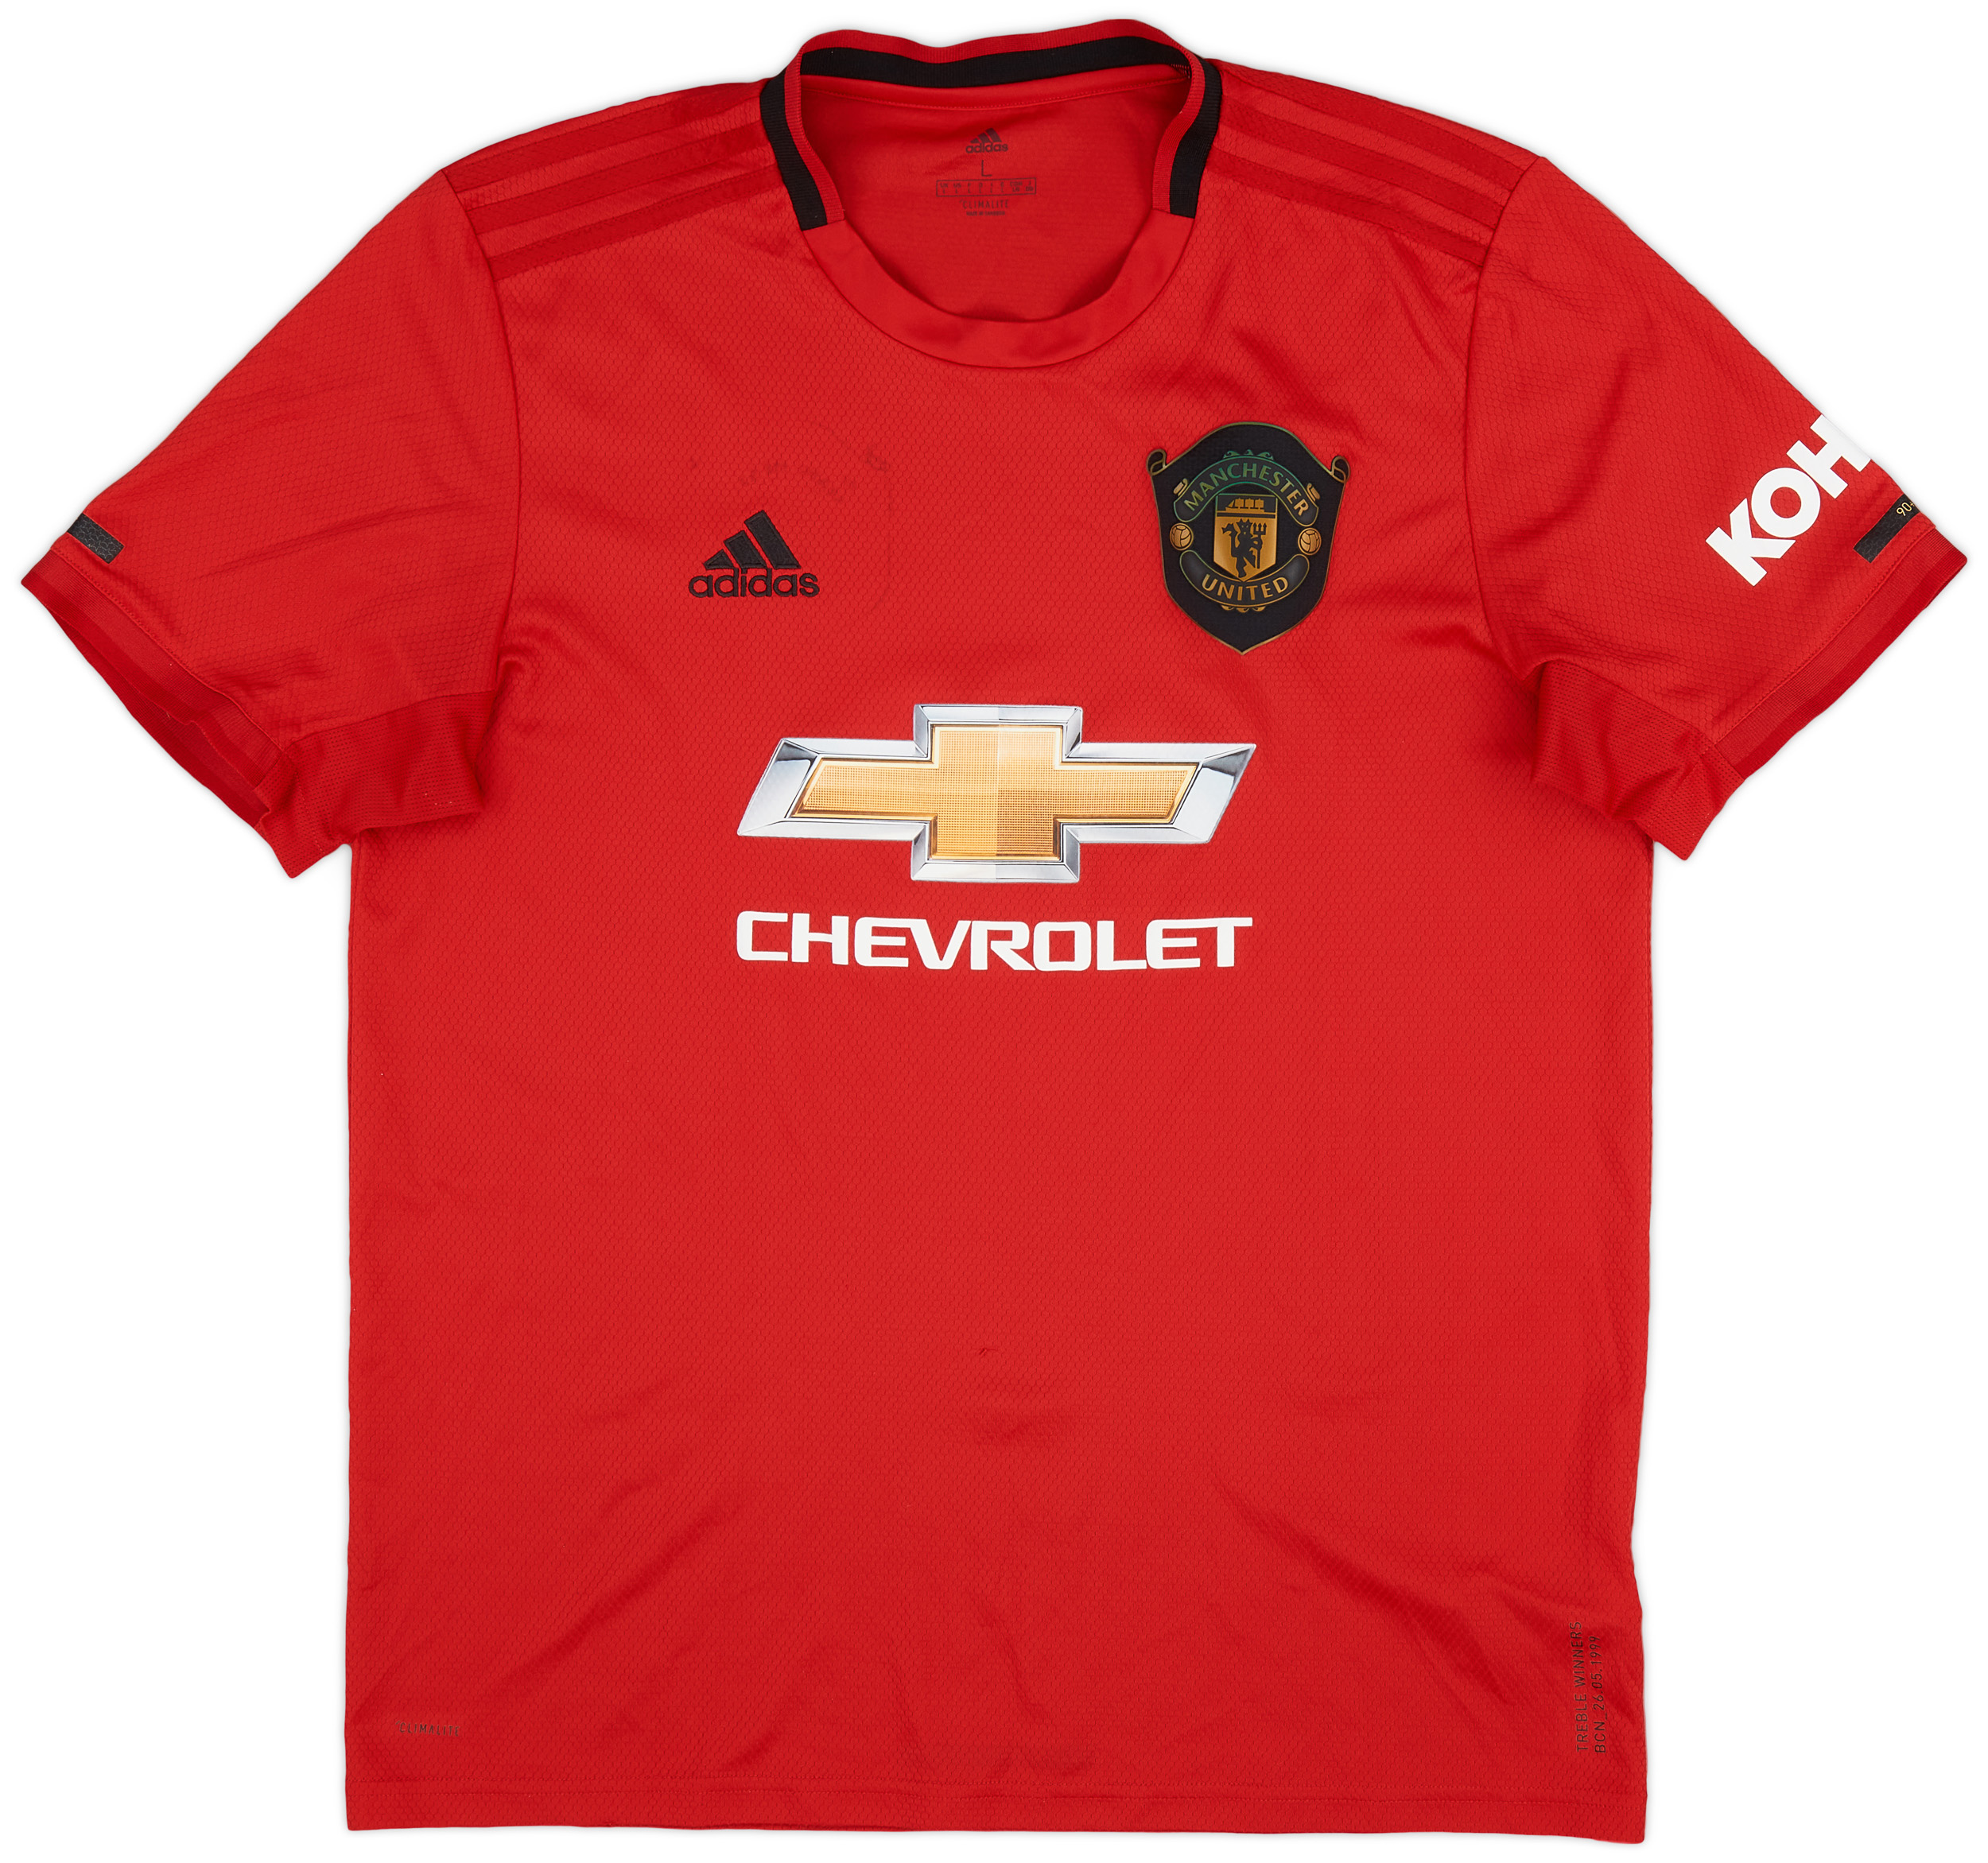 2019-20 Manchester United Home Shirt - 9/10 - ()